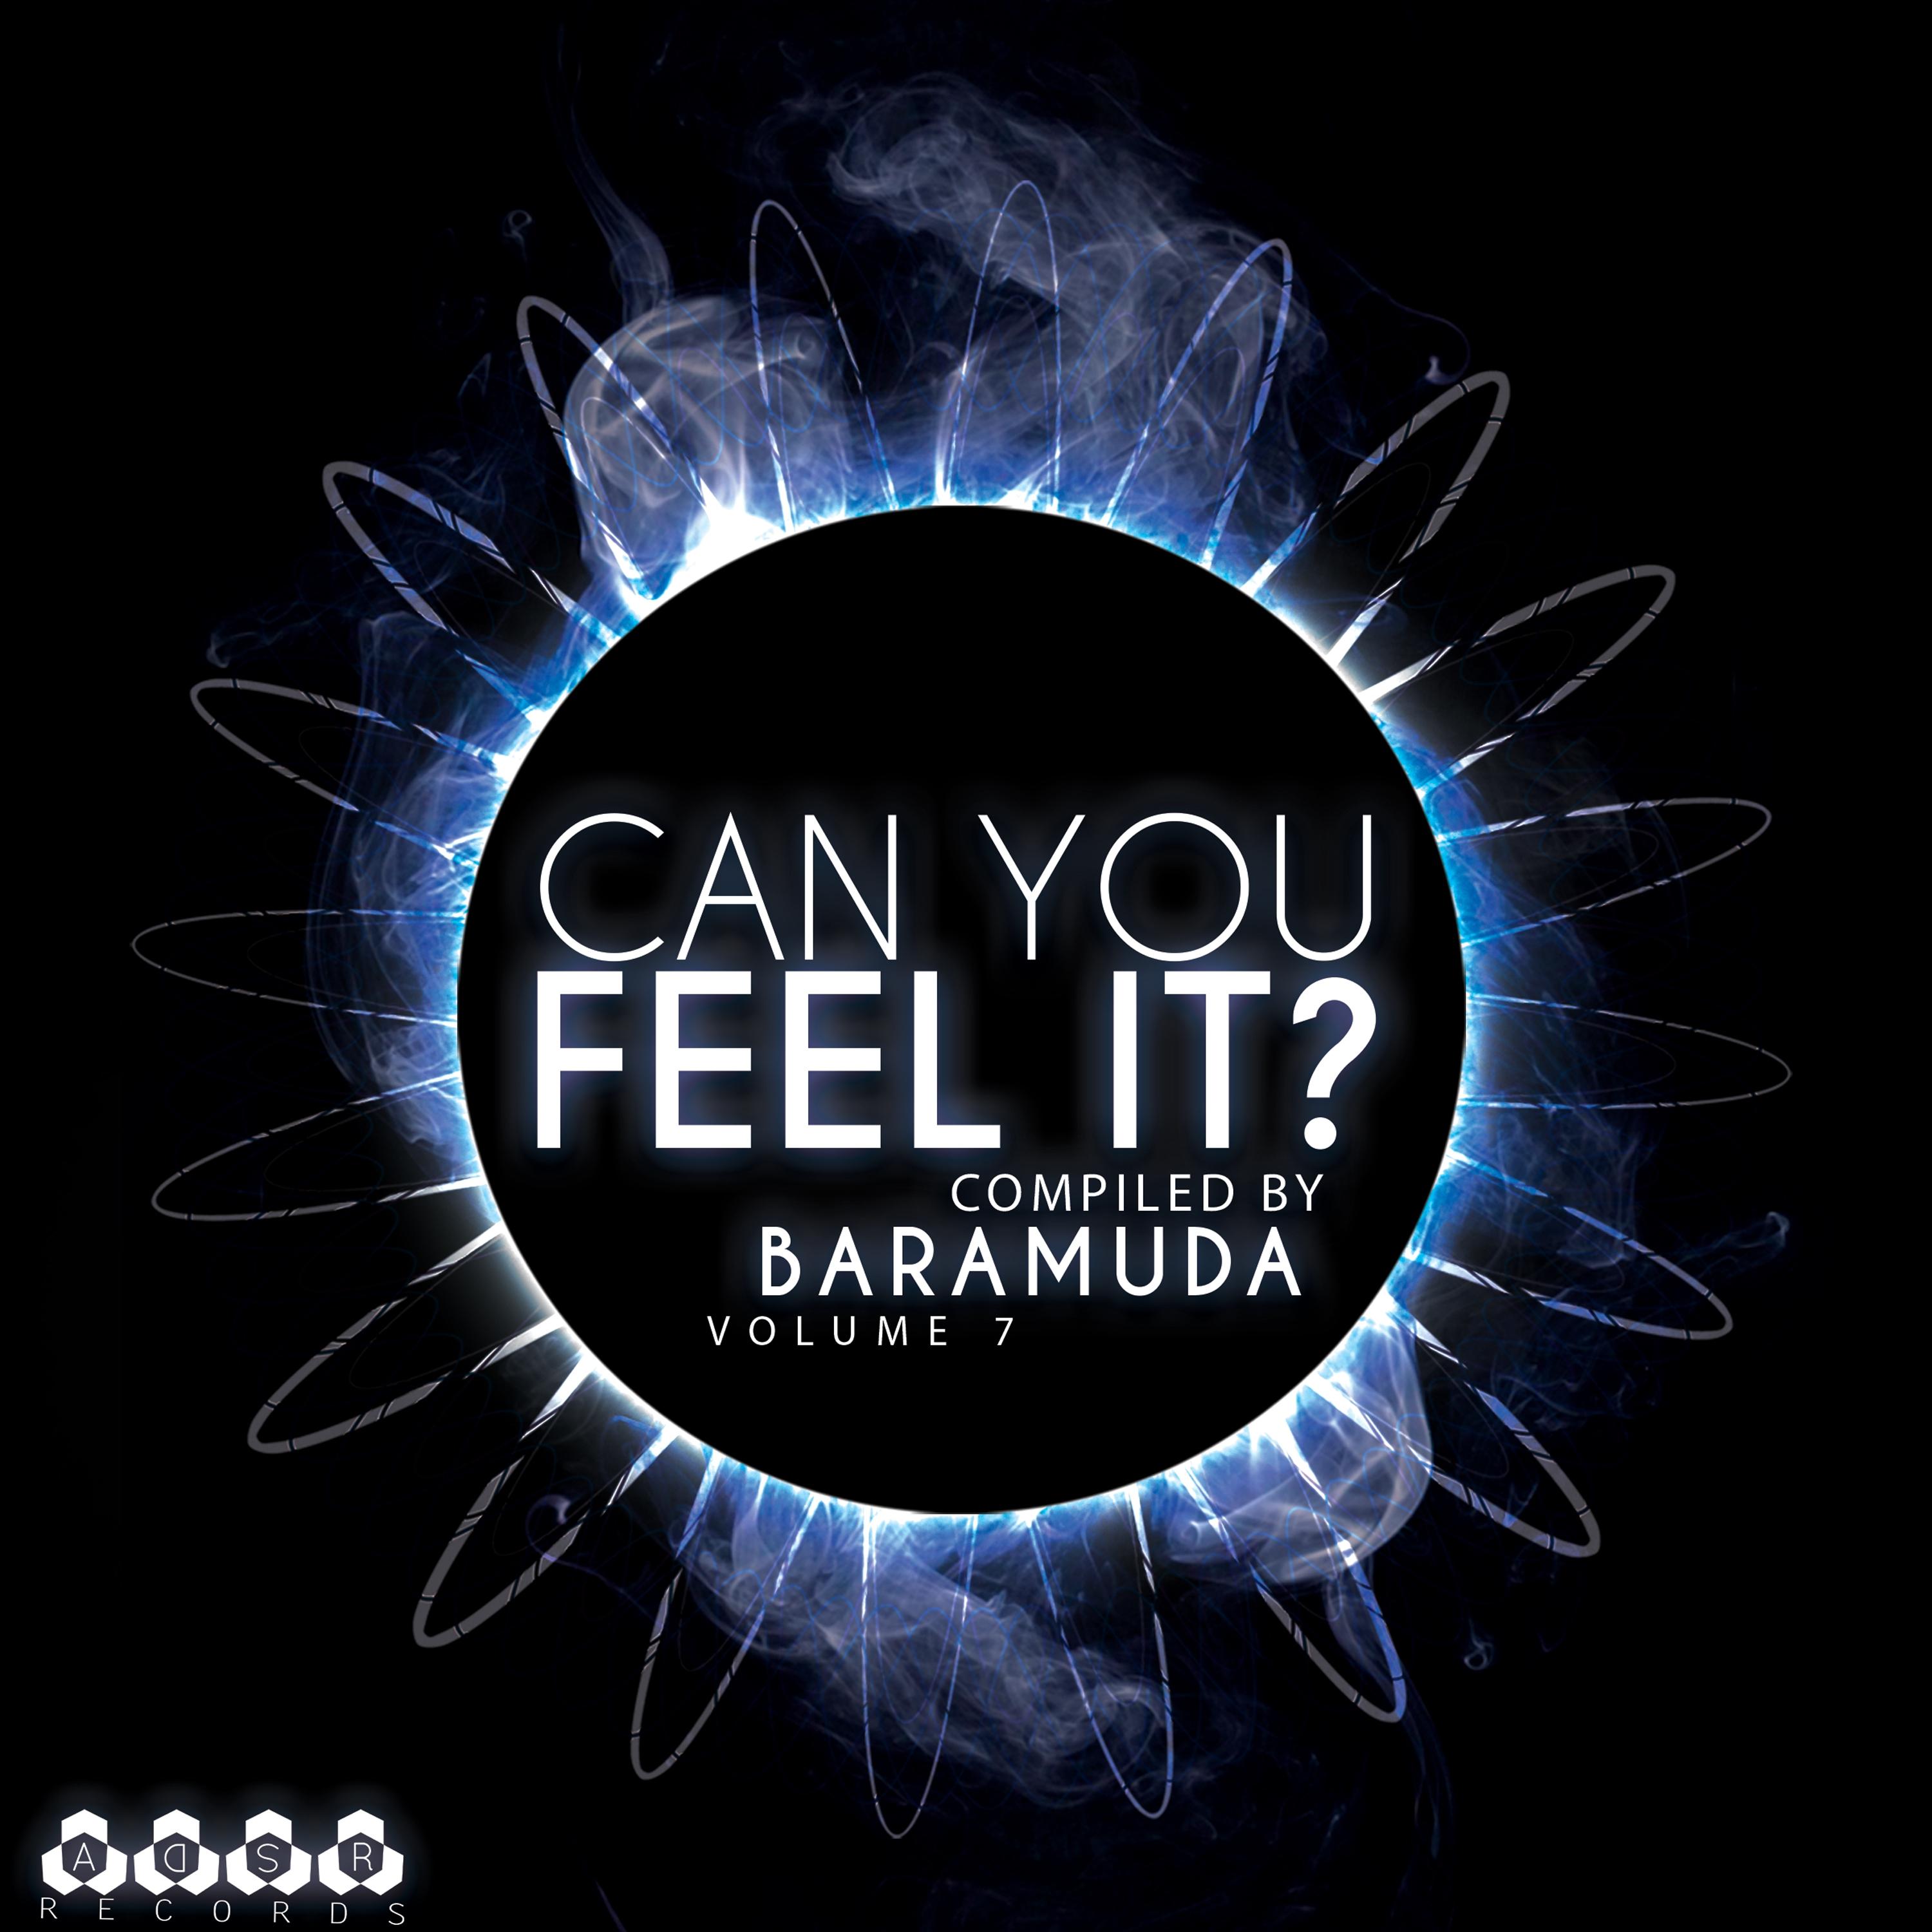 Can You Feel it?, Vol. 7 (Compiled By Baramuda)